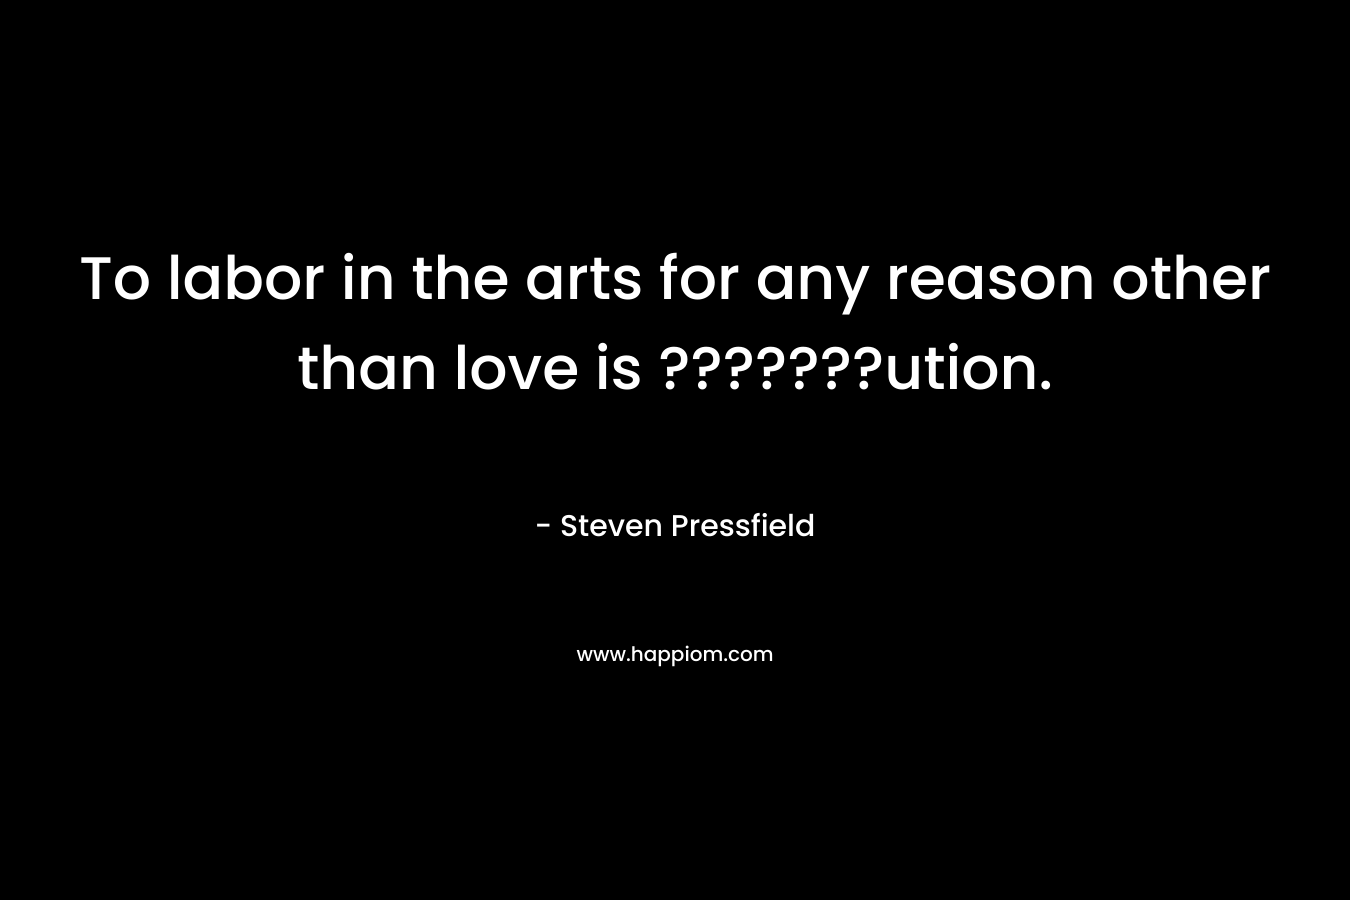 To labor in the arts for any reason other than love is ???????ution.